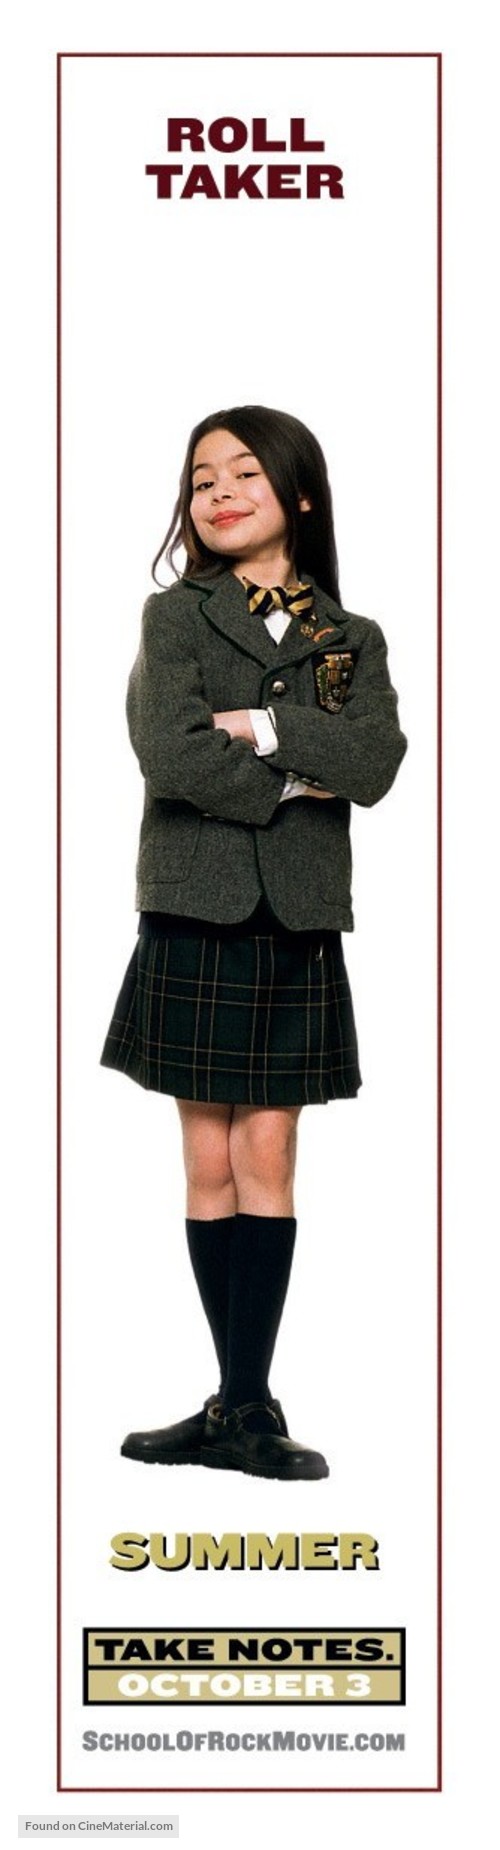 The School of Rock - Character movie poster